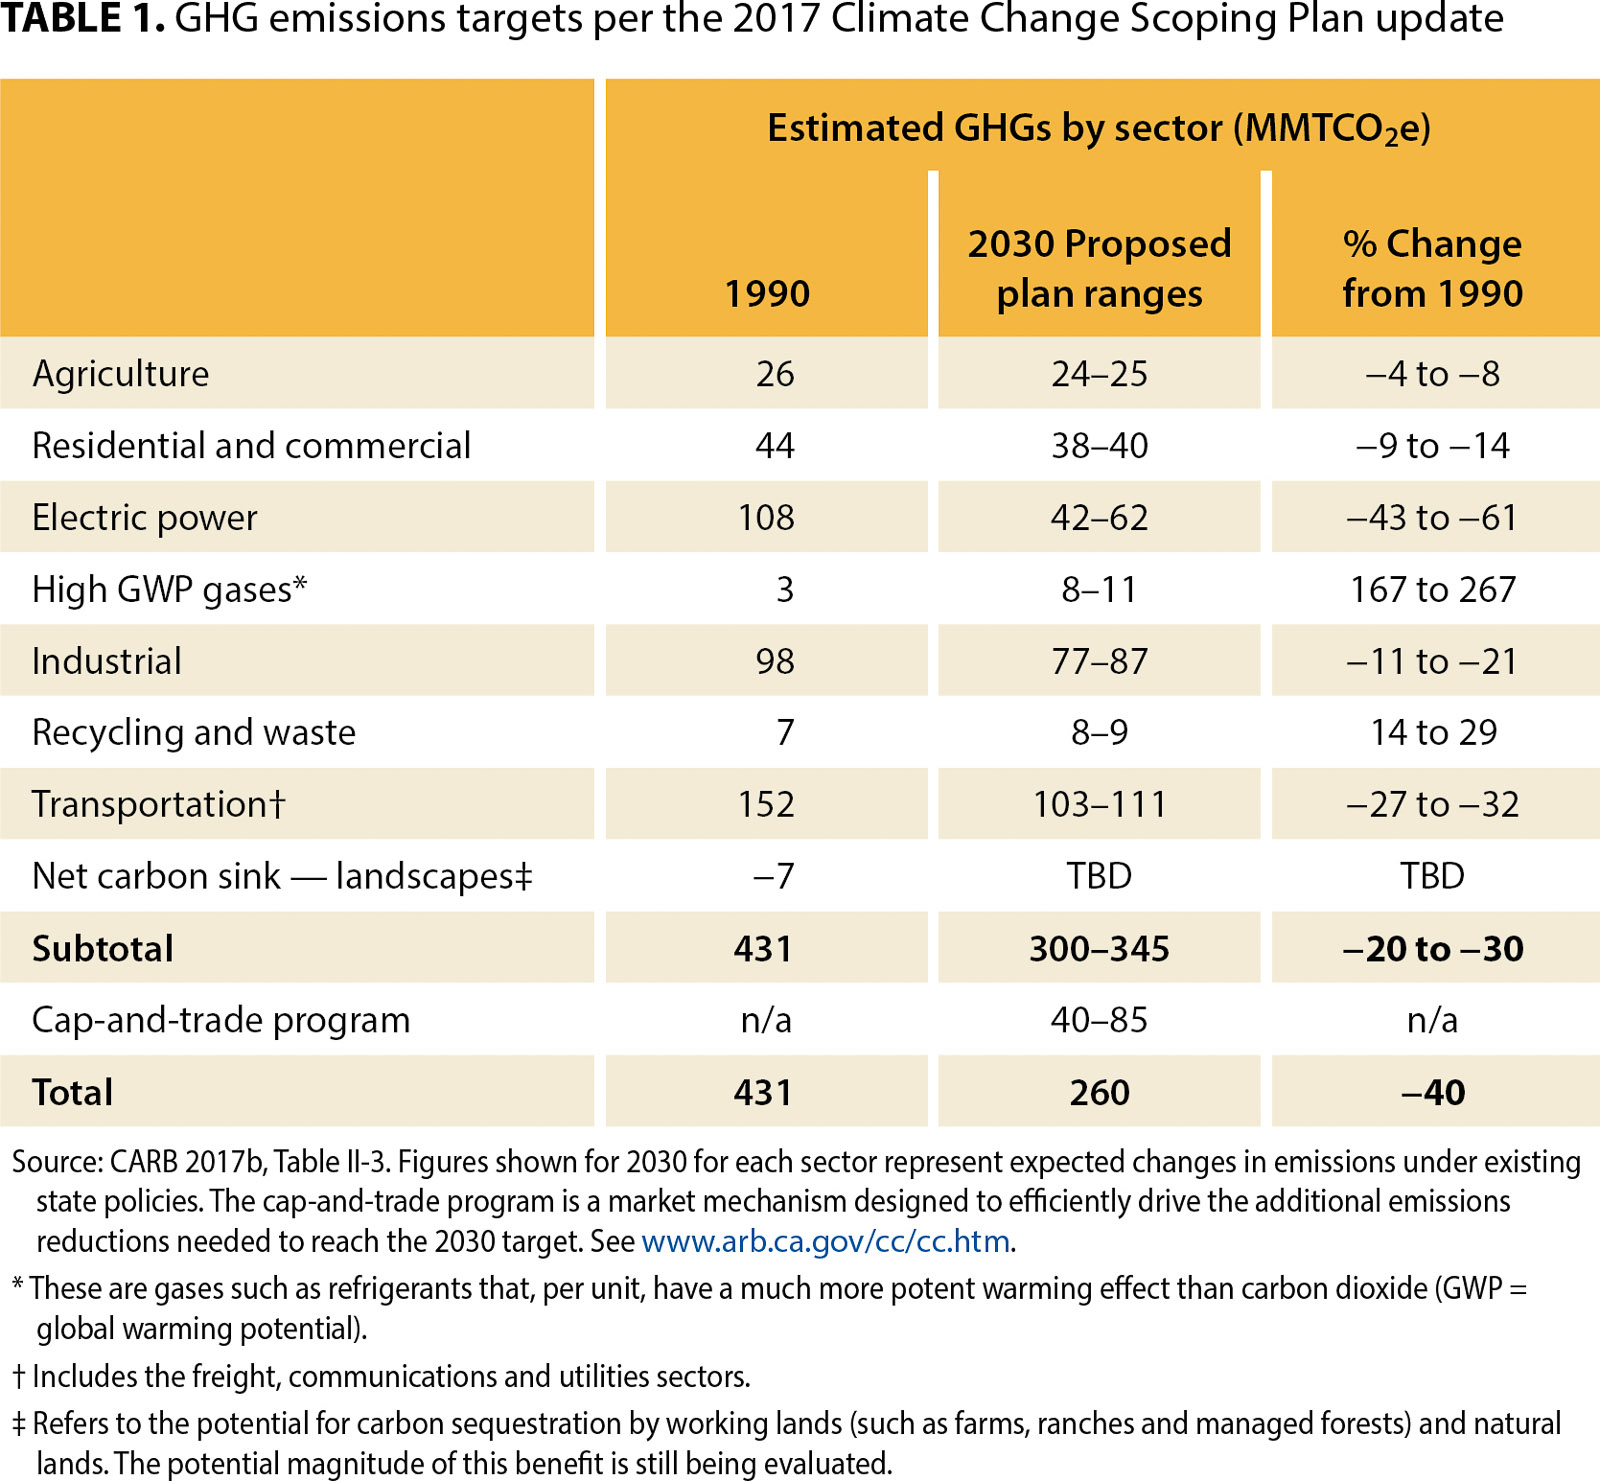 GHG emissions targets per the 2017 Climate Change Scoping Plan update